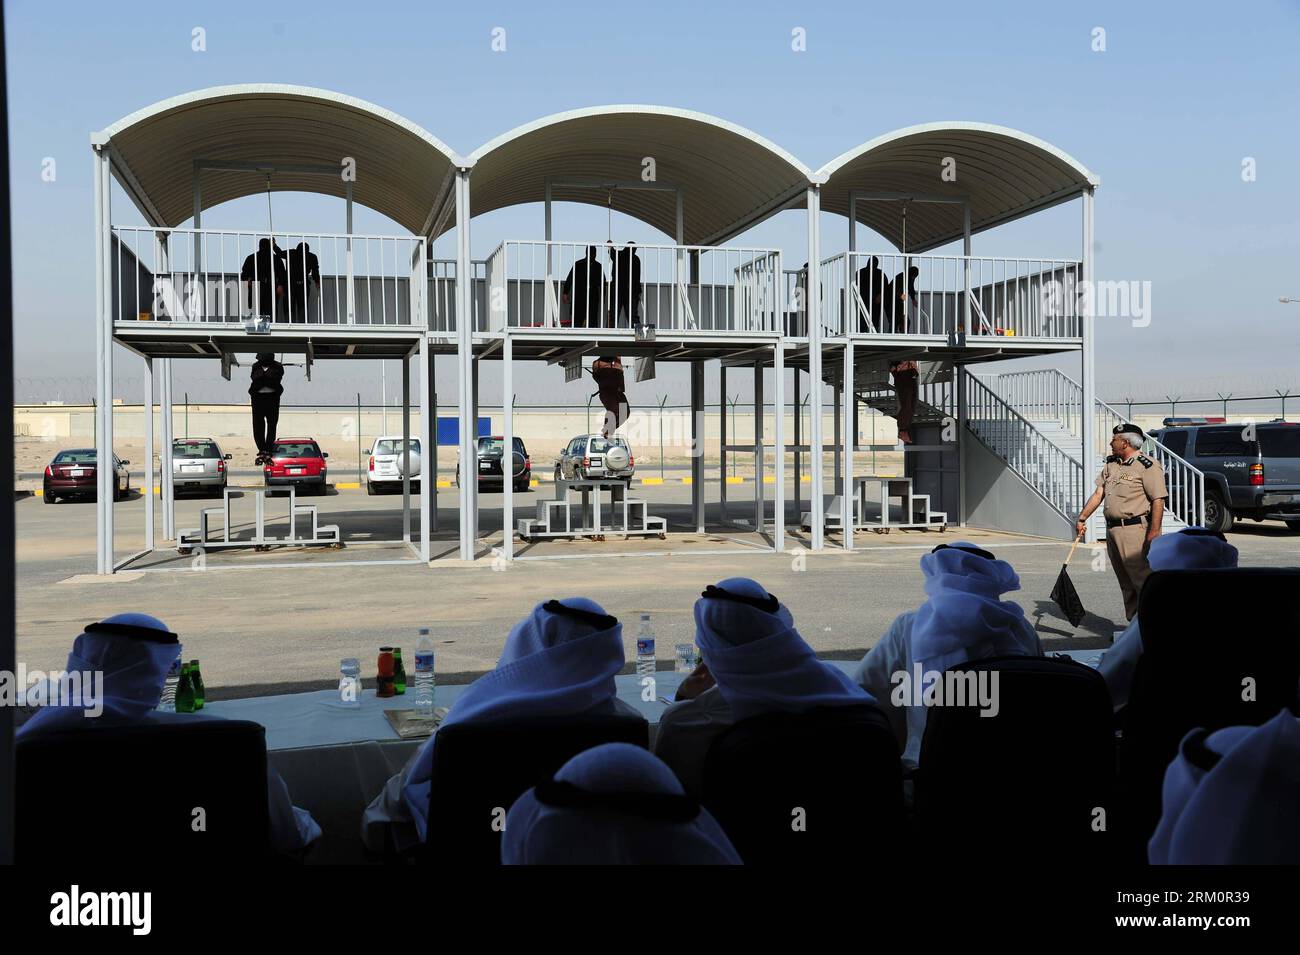 Bildnummer: 59465102  Datum: 01.04.2013  Copyright: imago/Xinhua (130401) -- KUWAIT CITY, APRIL 1, 2013 (Xinhua) -- Three men are executed by hanging in west of Kuwait City, capital of Kuwait, on April 1, 2013. Three convicted murderers, a Pakistani, a Saudi and a stateless Arab, were hanged on Monday. It s the first executions in Kuwait since May 2007, according to the ministry of justice. (Xinhua/Noufal Ibrahim) (jl) KUWAIT-MURDERER-EXECUTION PUBLICATIONxNOTxINxCHN Gesellschaft Kriminalität Mörder erhängt Exekution Hinrichtung erhängen Tötung x0x xub 2013 quer premiumd      59465102 Date 01 Stock Photo